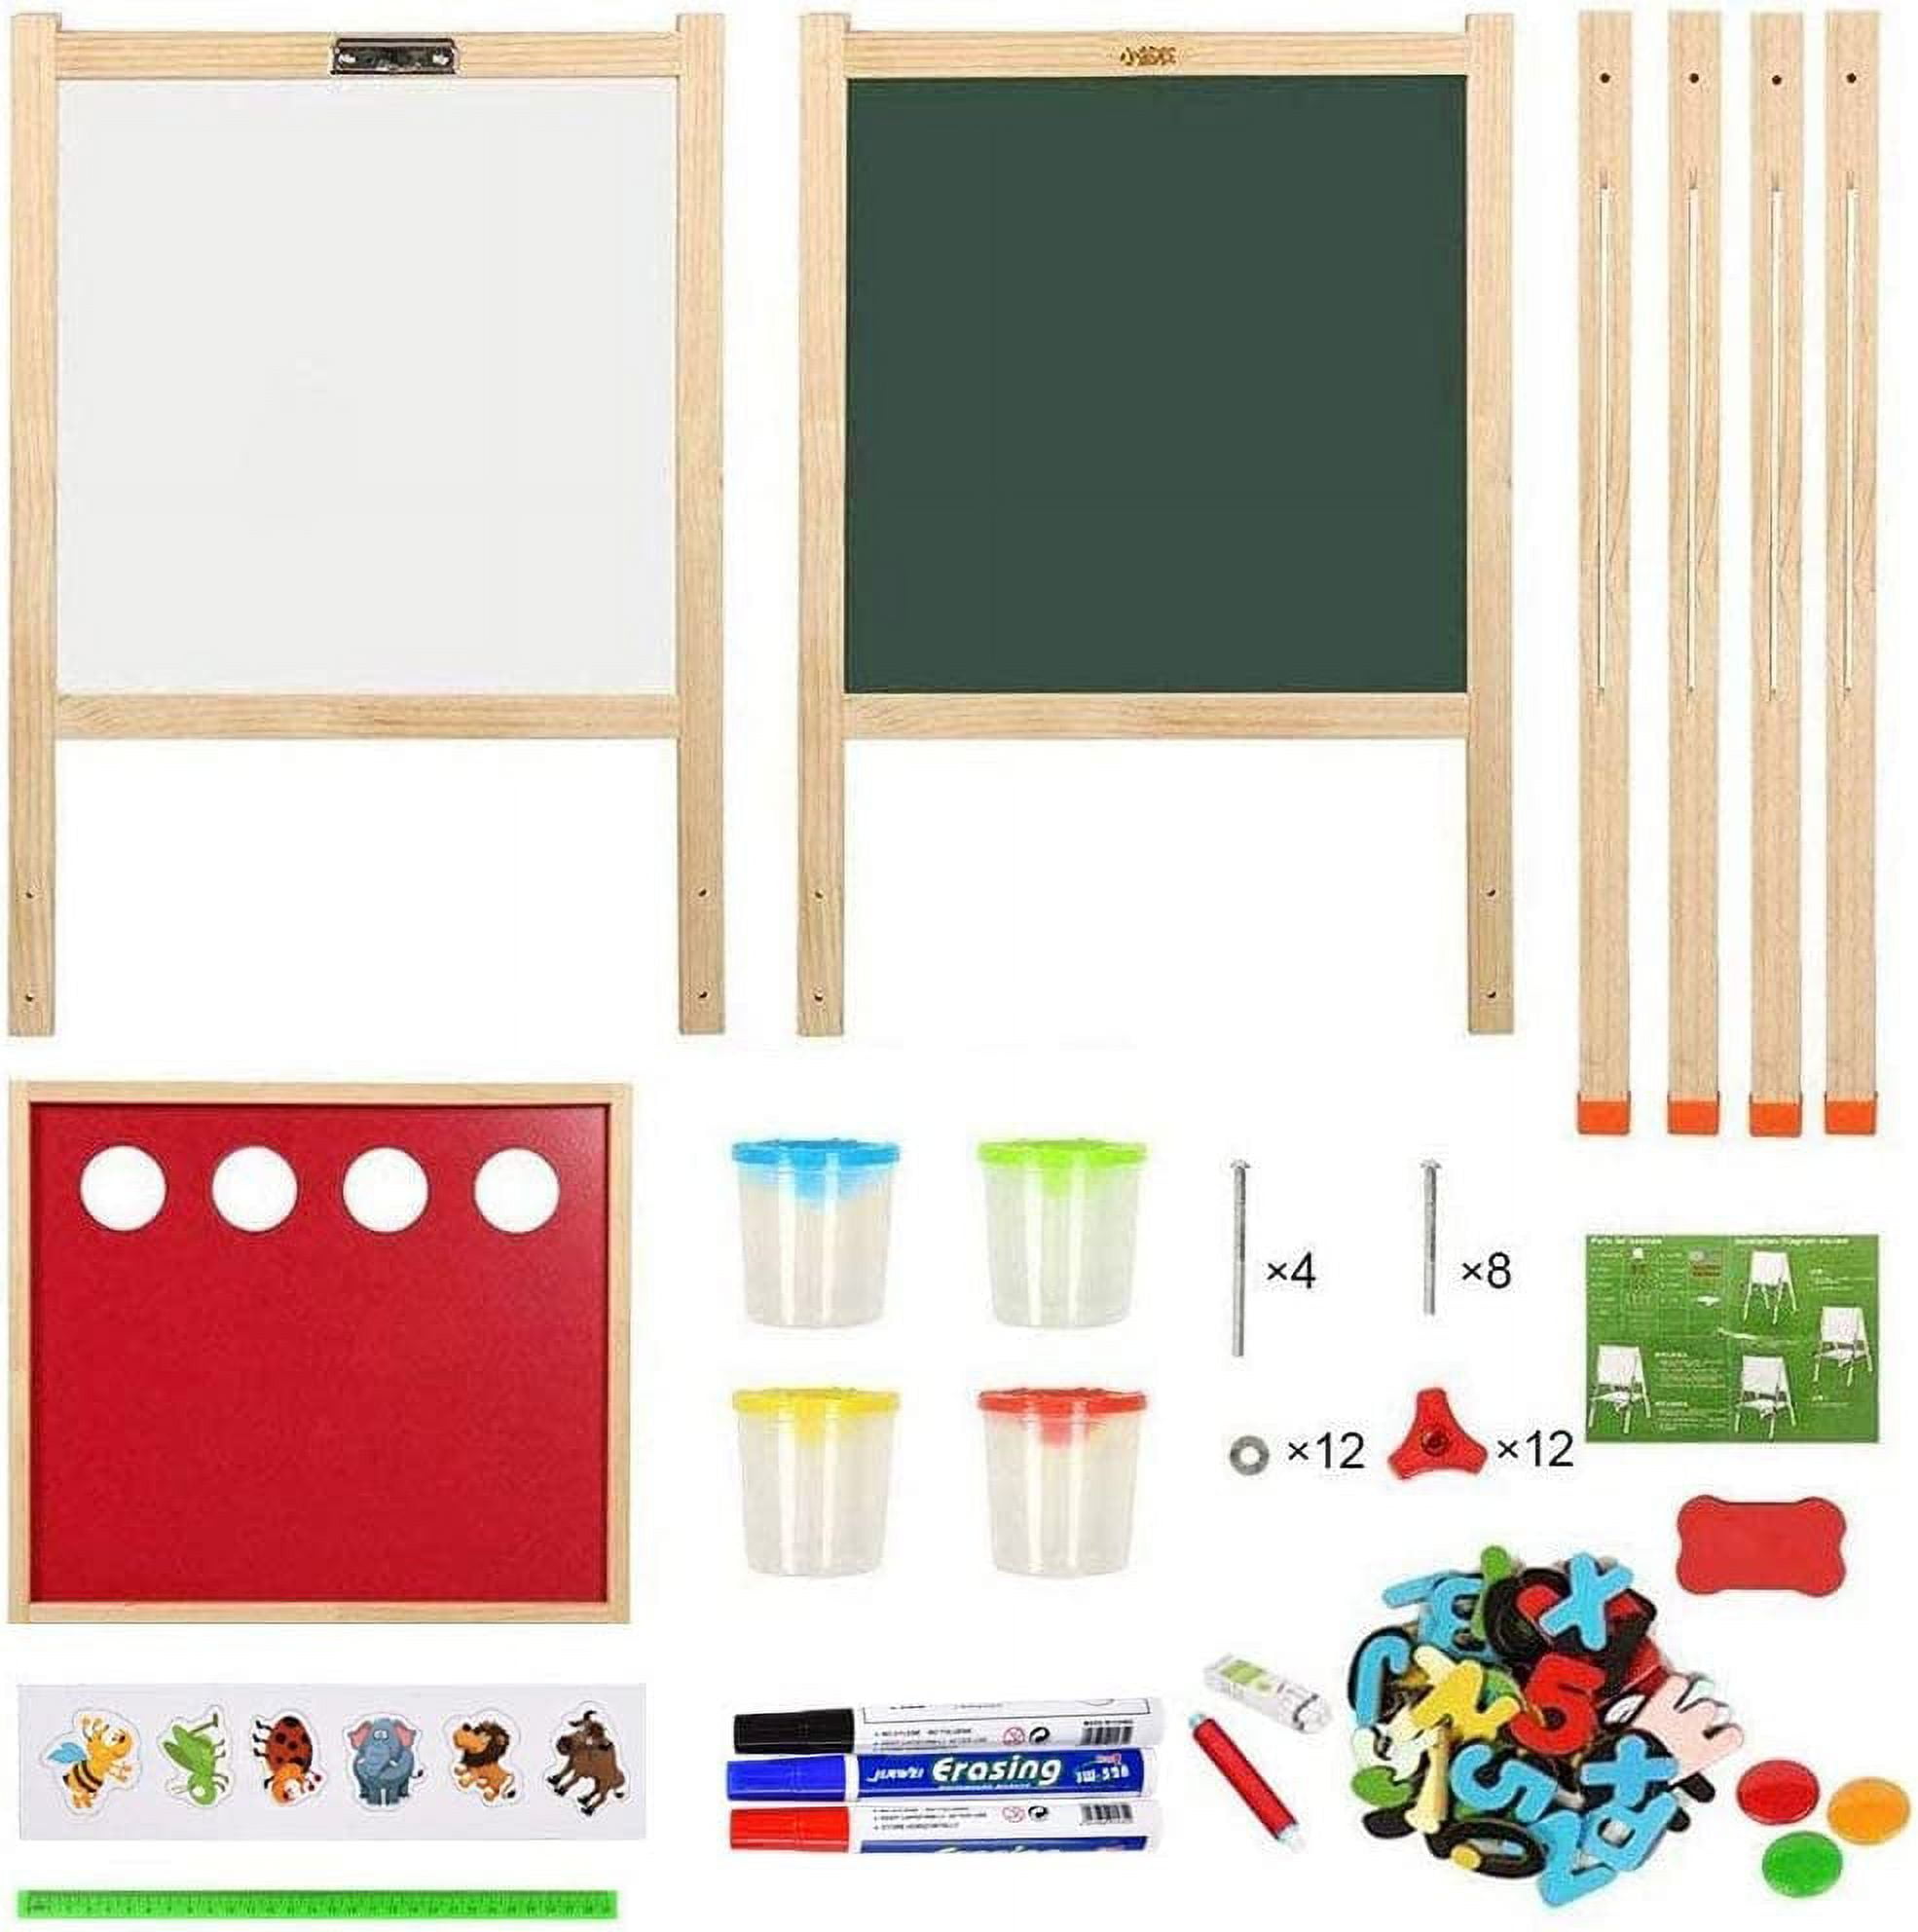  Dripex Art Easel for Kids - Double Sided Toddler Wooden Easel  with Dry Erase Board&Chalkboard, Paper Roll, Letters&Numbers - Adjustable Children  Painting Easel for Drawing (Brown) : Toys & Games